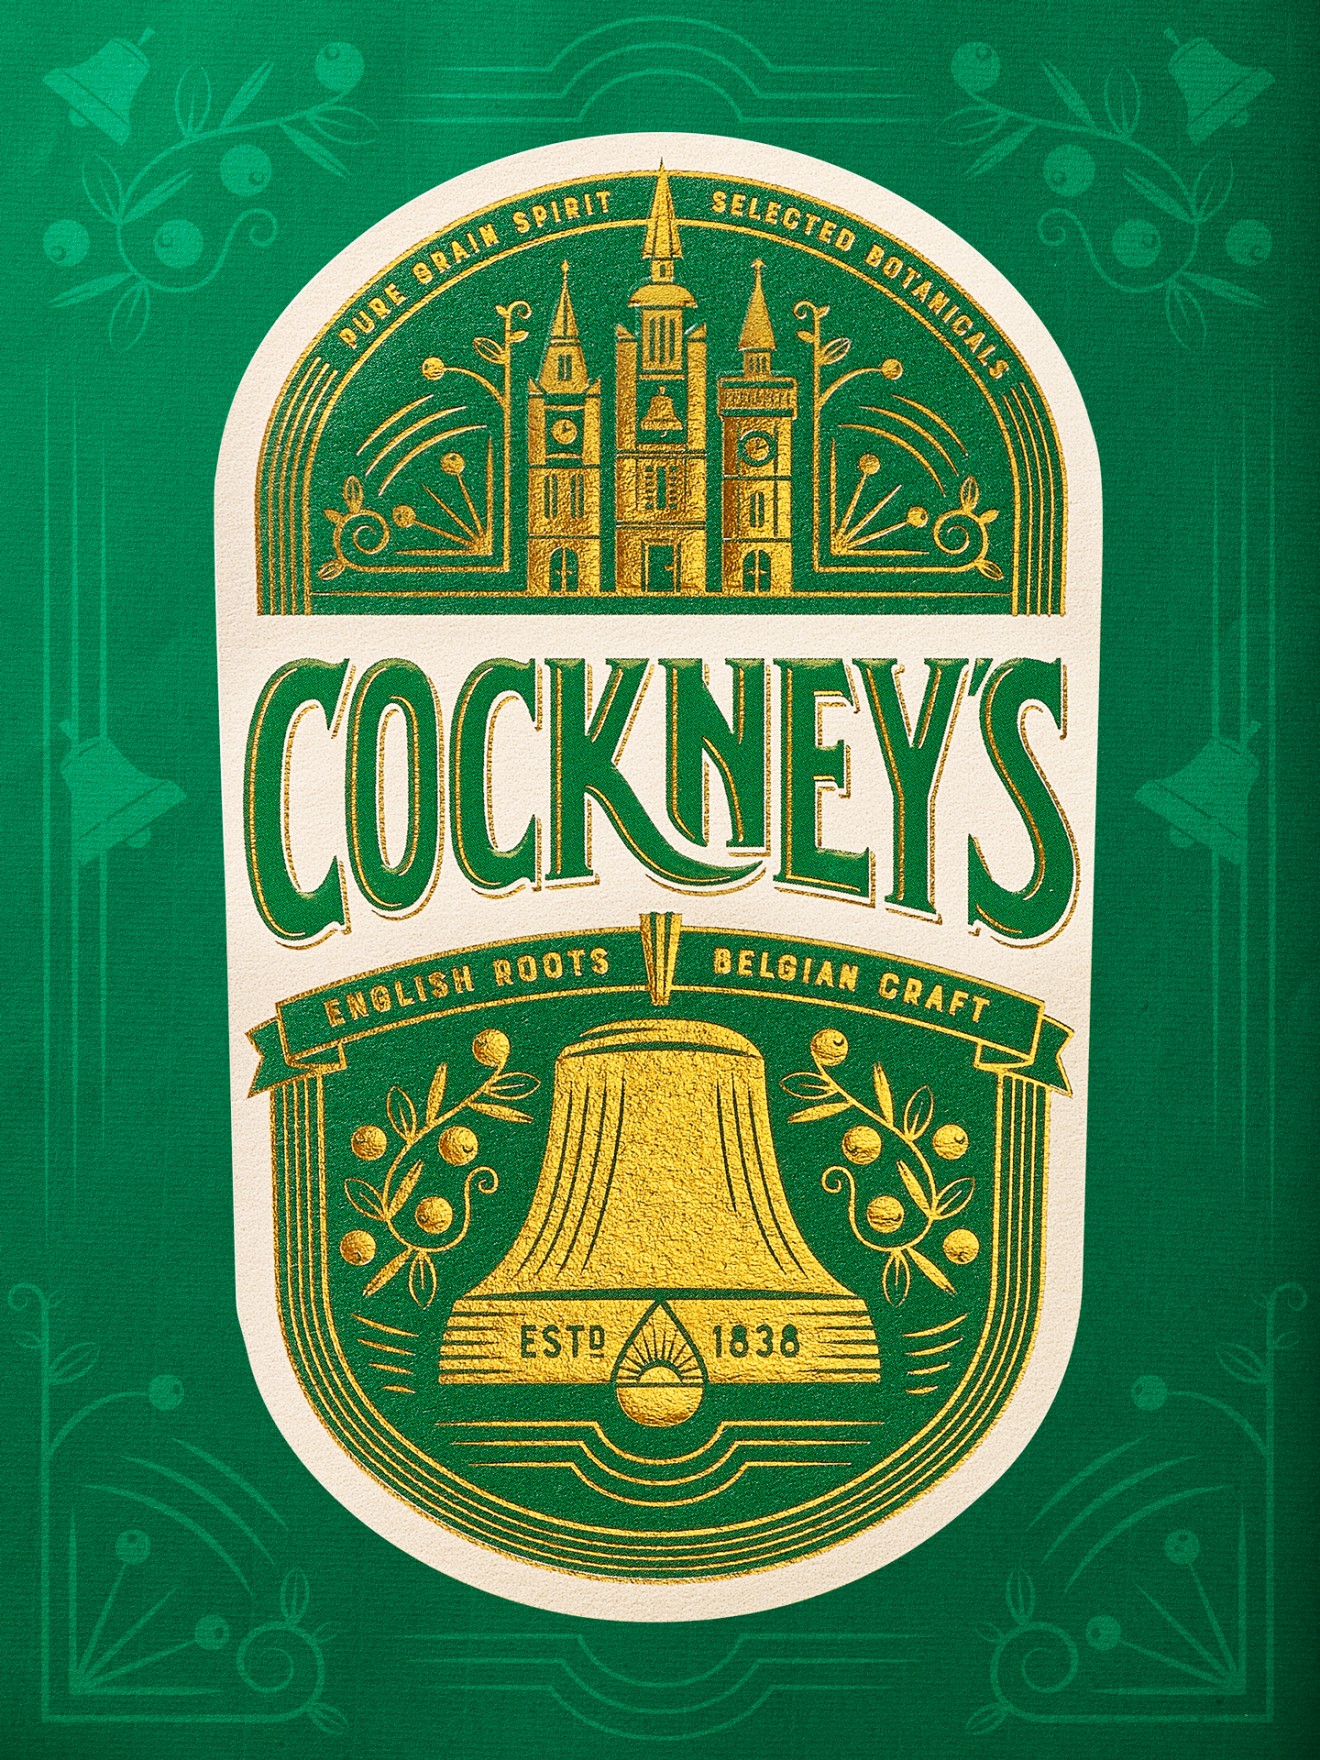 Quatre Mains package design - Cockney's Gin packaging redesign